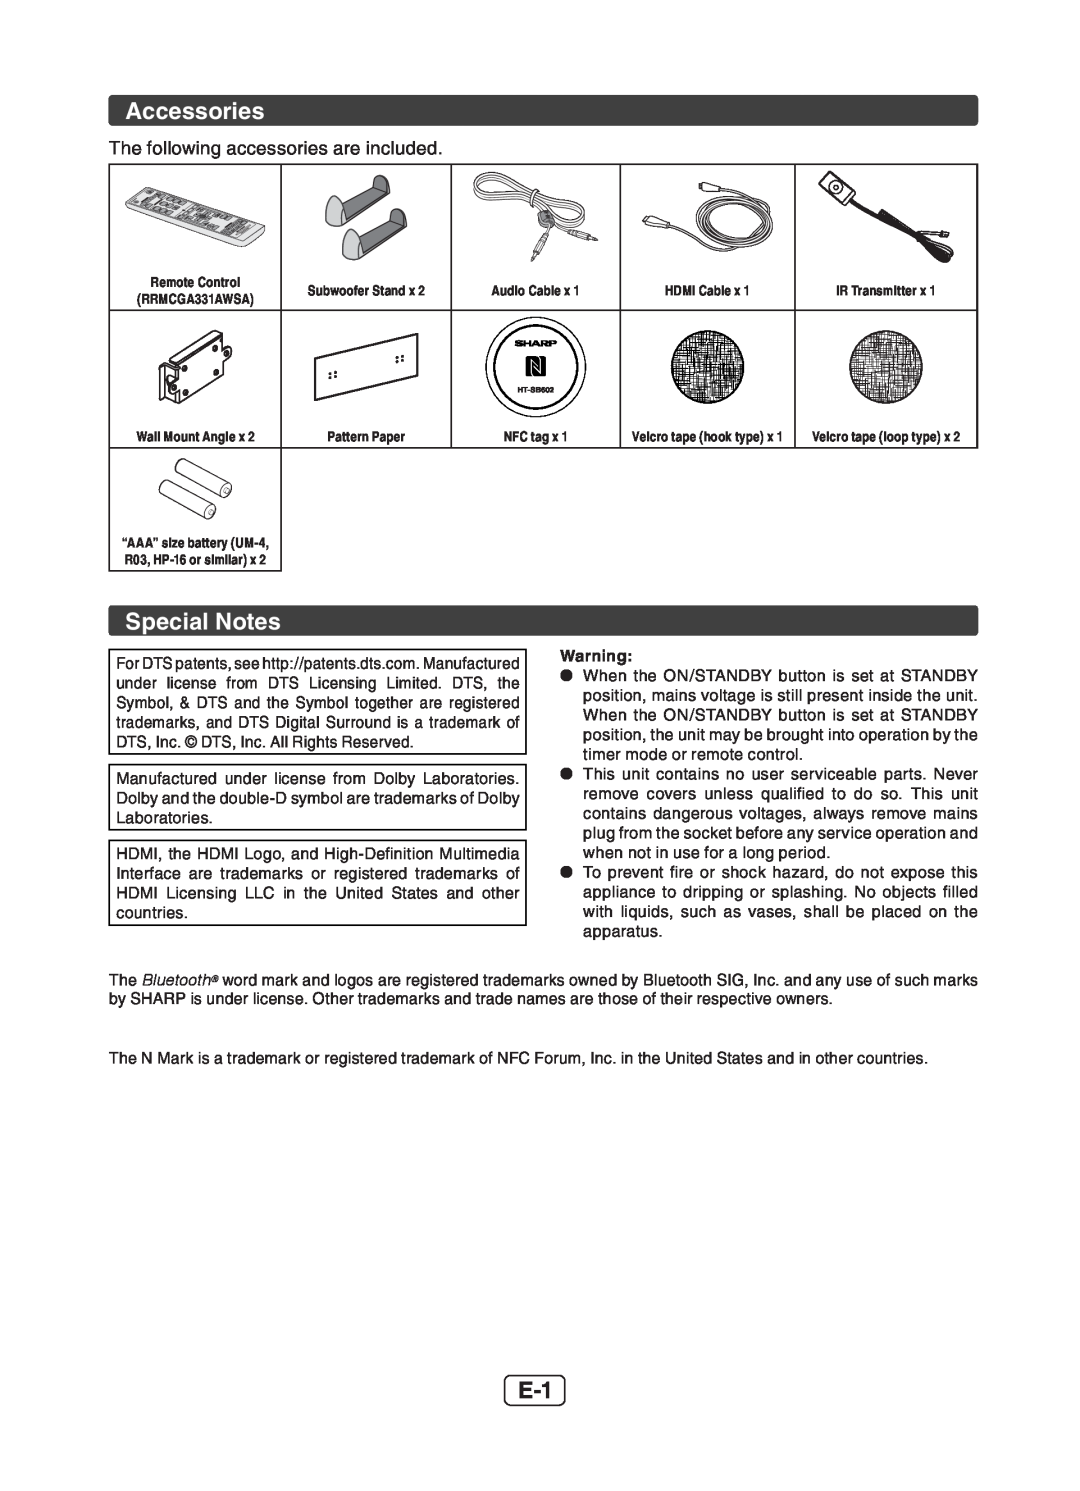 Sharp HT-SB602 operation manual Accessories, Special Notes 